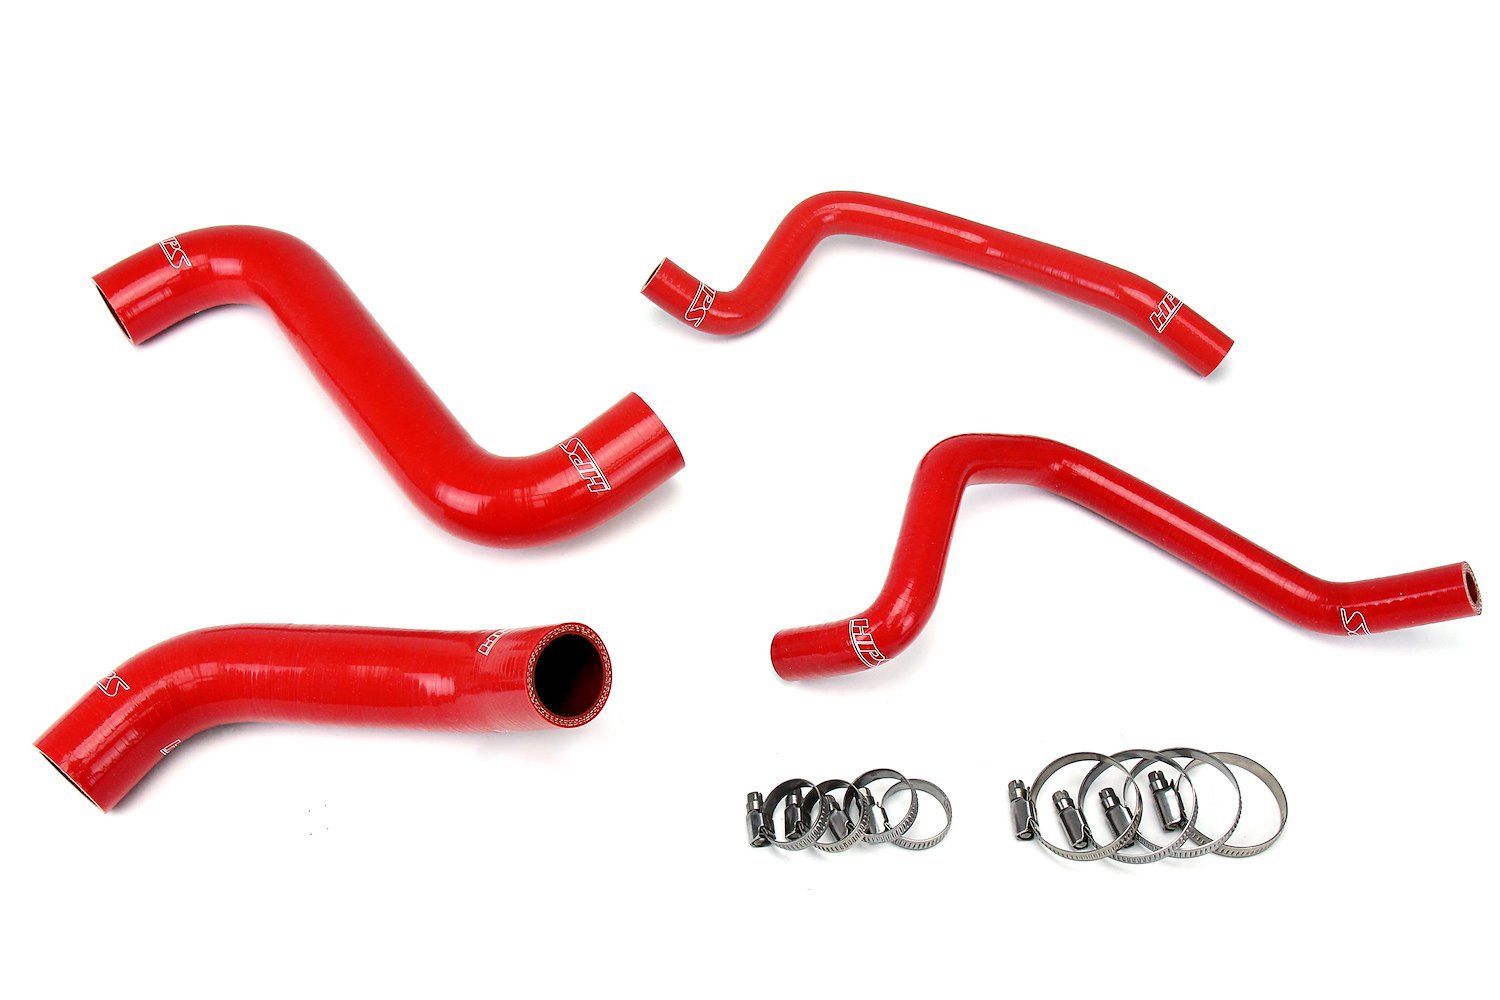 57-1810-RED Radiator and Heater Hose Kit, 3-Ply Reinforced Silicone, Replaces Rubber Radiator & Heater Coolant Hoses